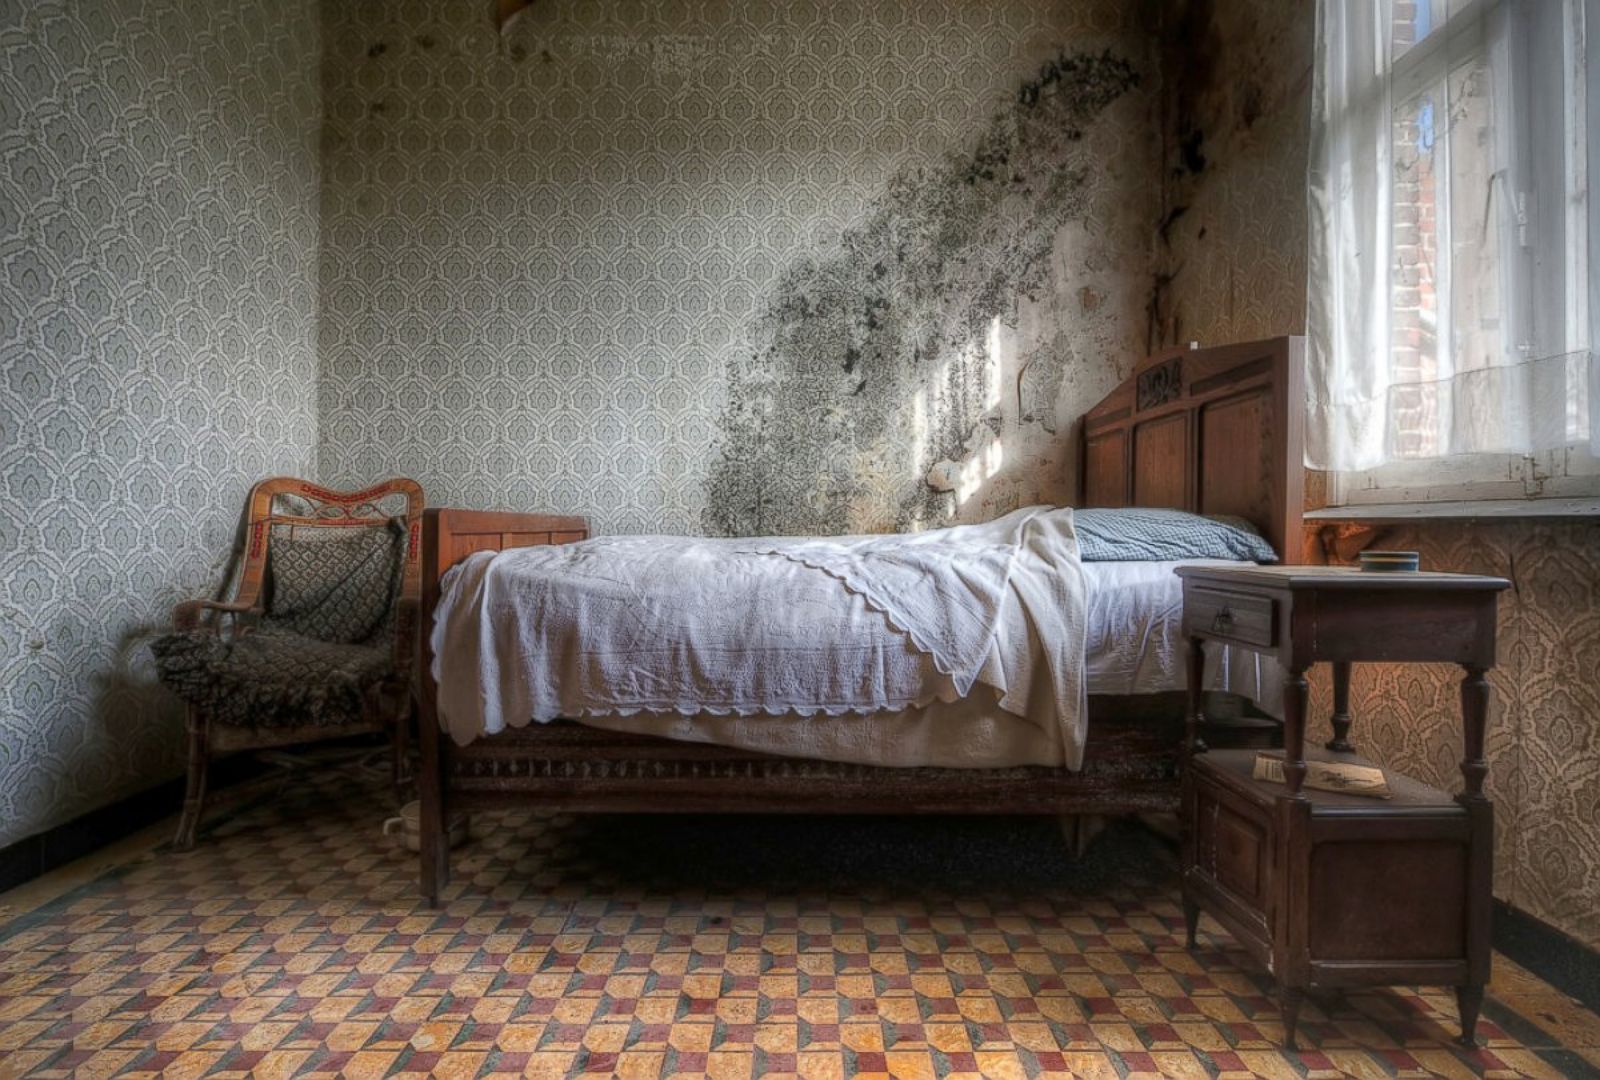 Images of These Abandoned Places Will Give You Chills